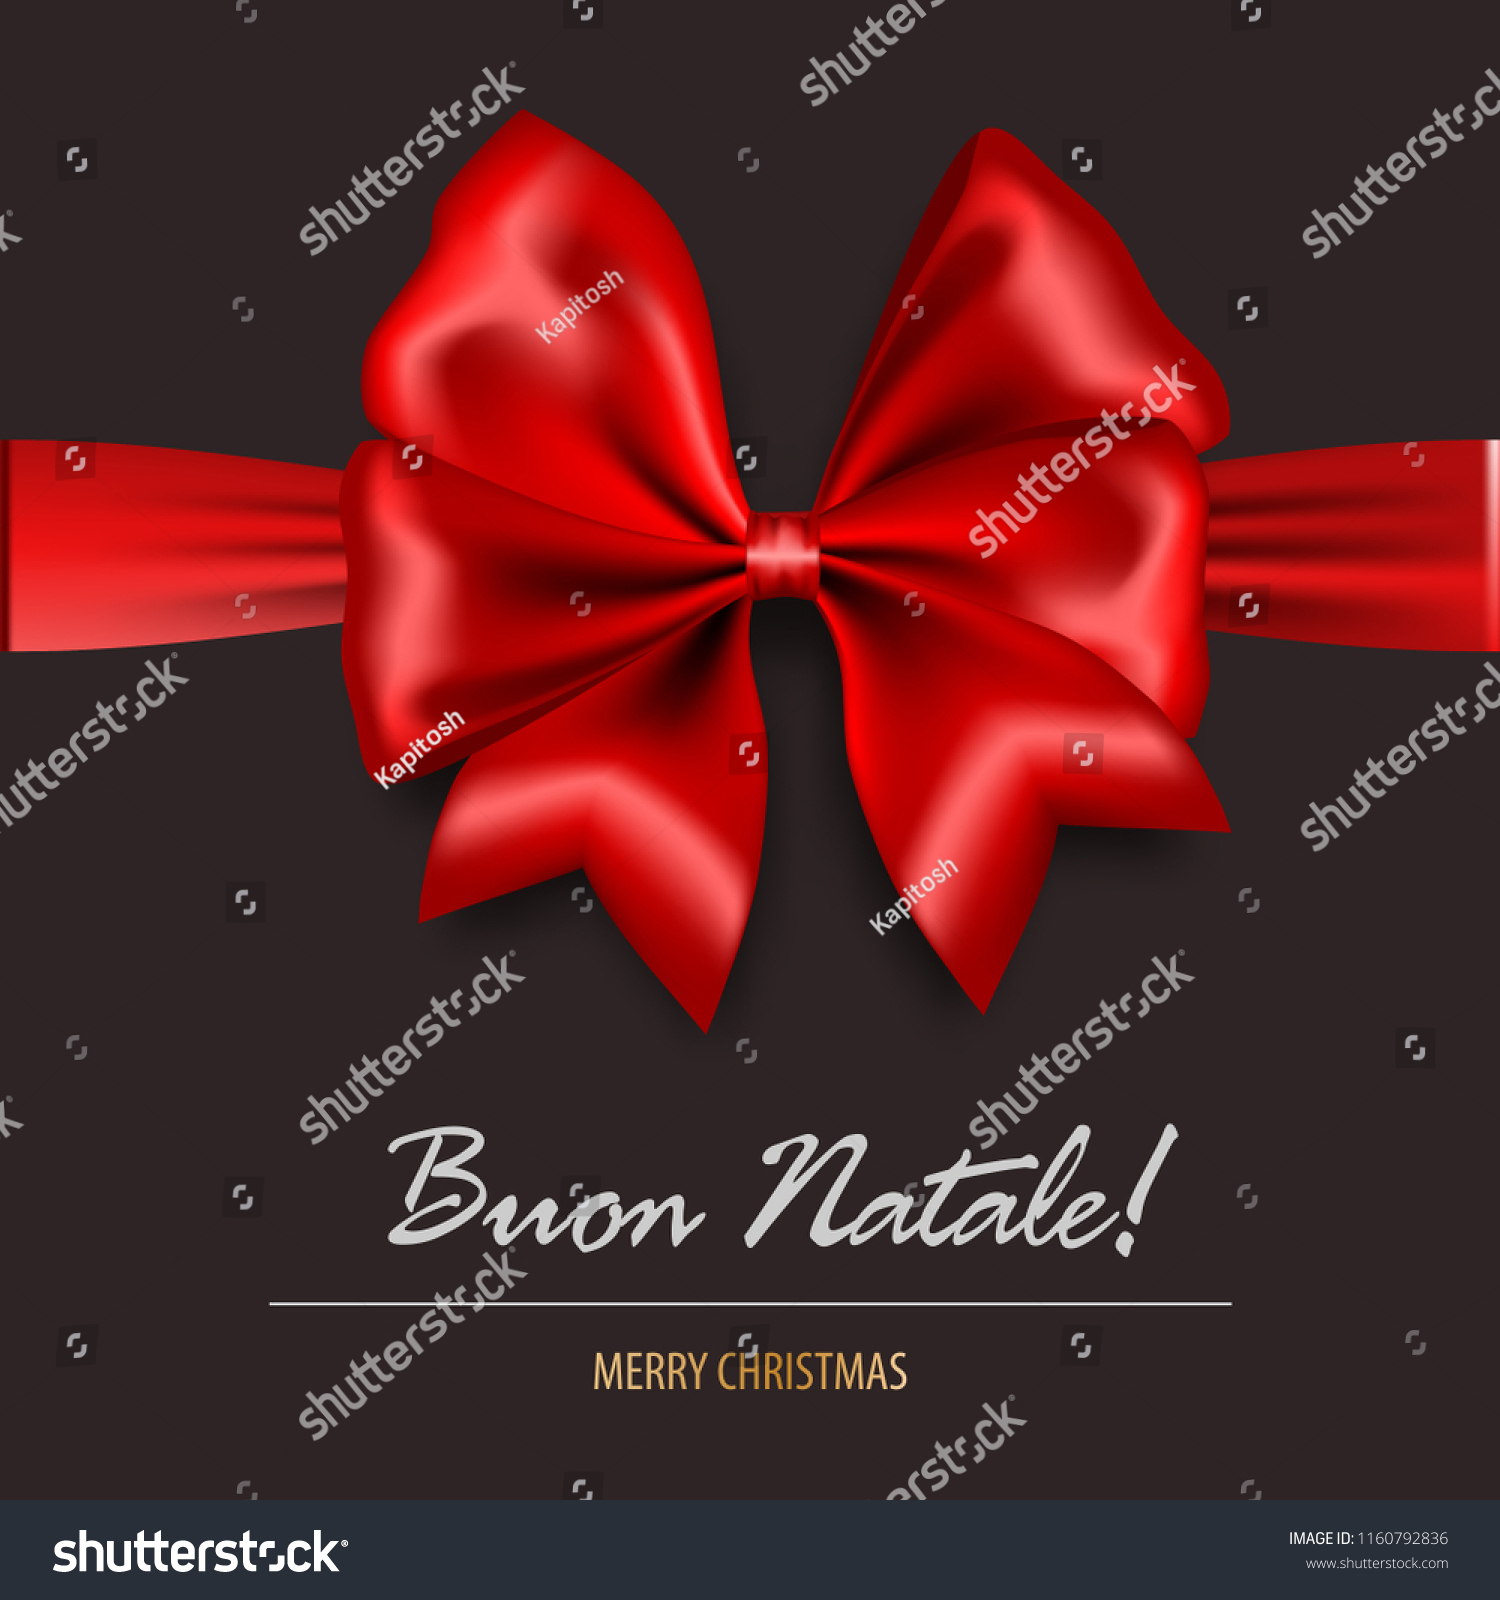 Banner Buon Natale.Buon Natale Merry Christmas Italy Red Stock Vector Royalty Free 1160792836